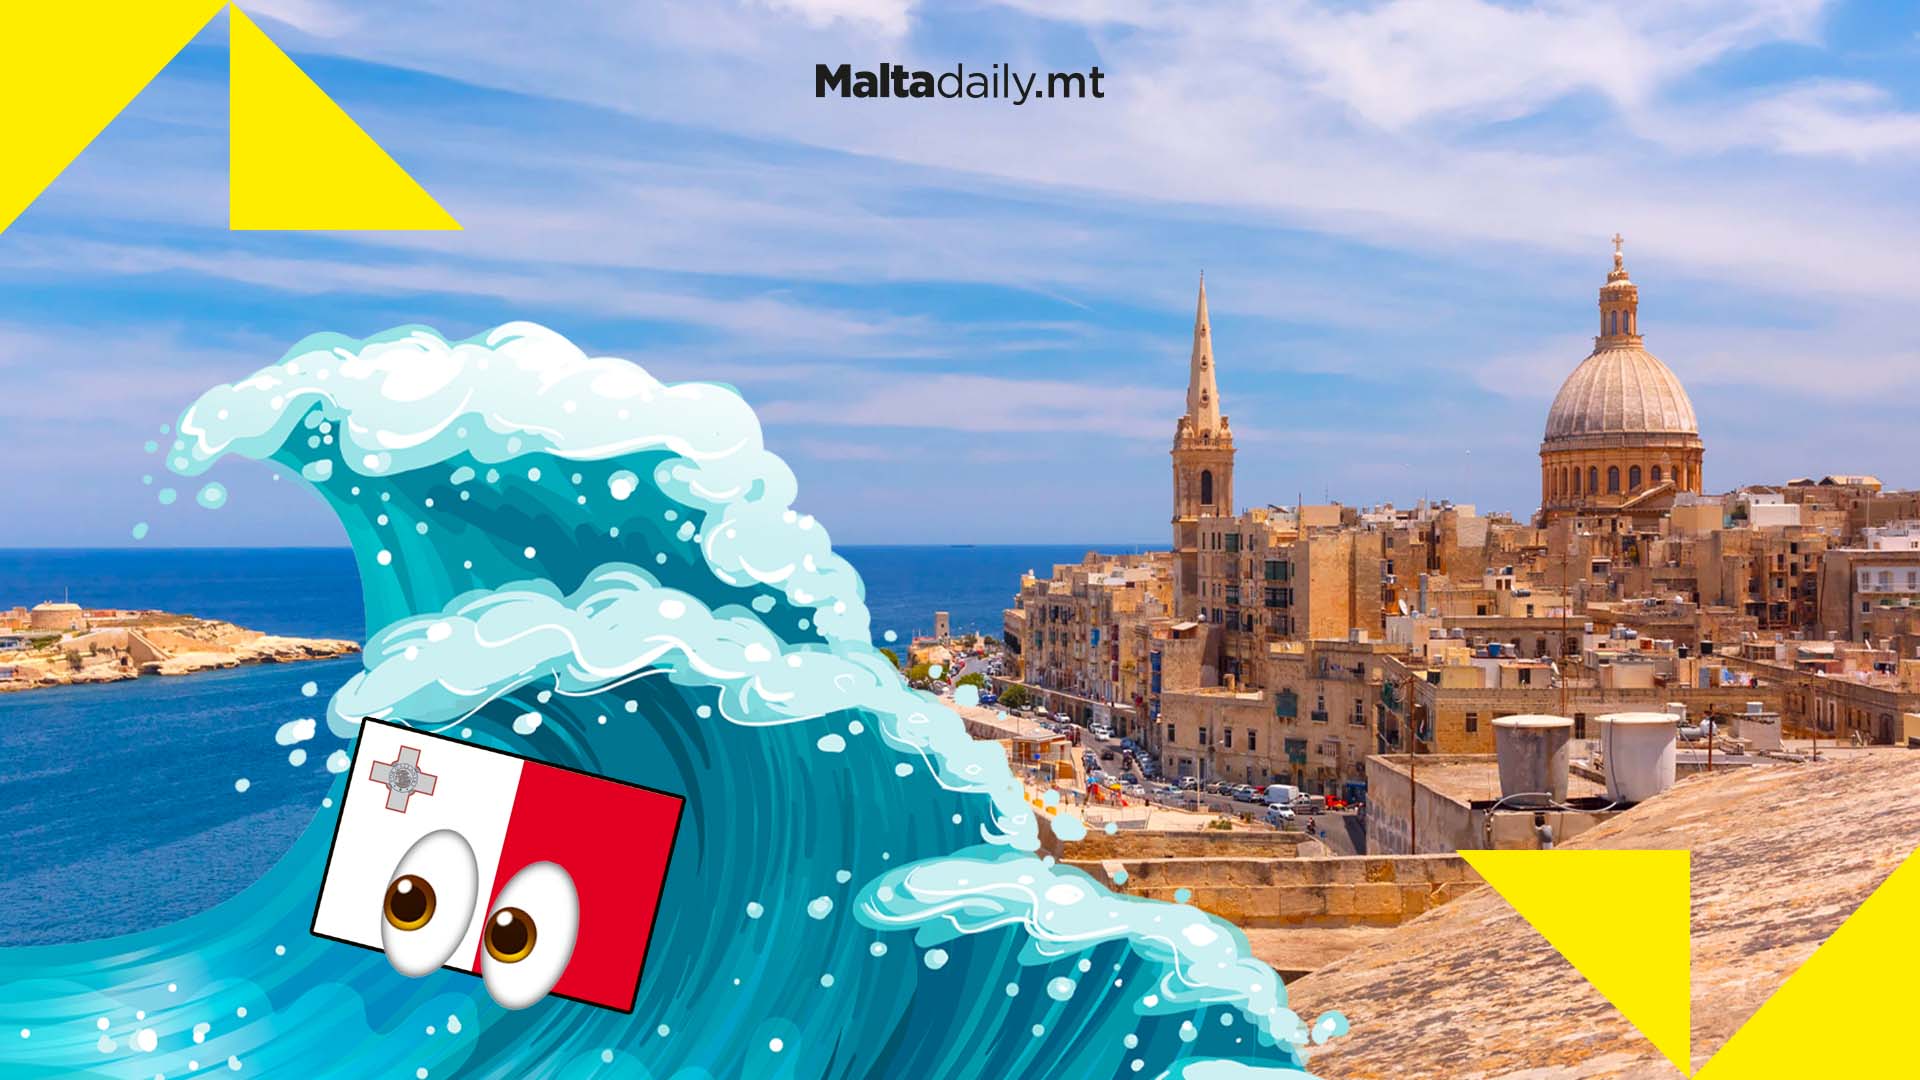 Malta needs to prepare for a tsunami hitting within 30 years says UNESCO